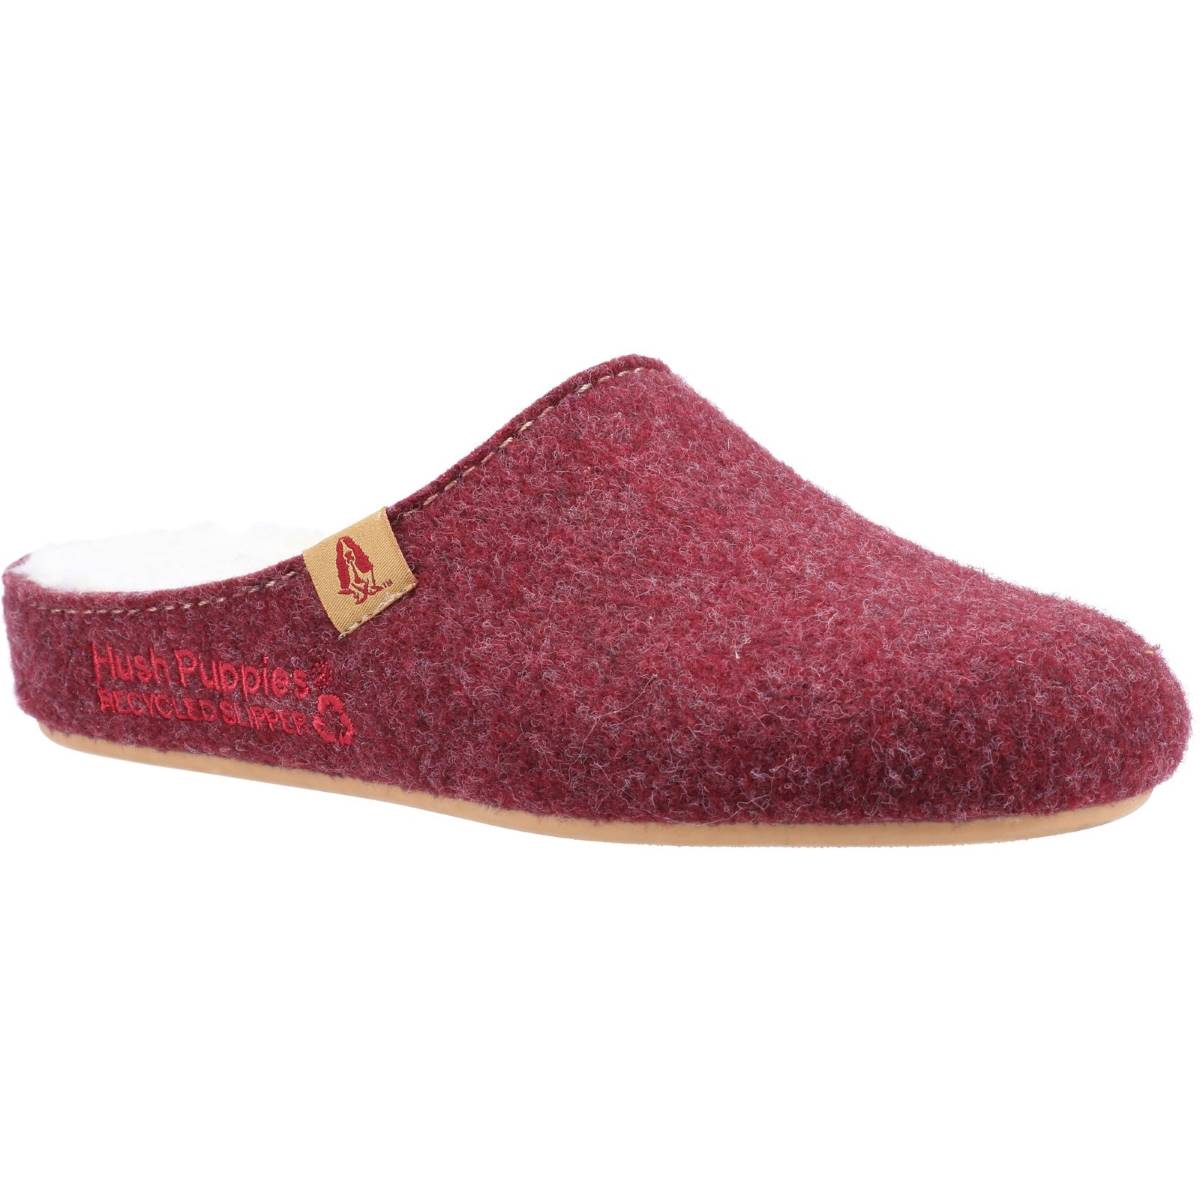 Hush Puppies The Good Slipper Burgundy Womens slippers HPW1000-199-1 in a Plain Textile in Size 5